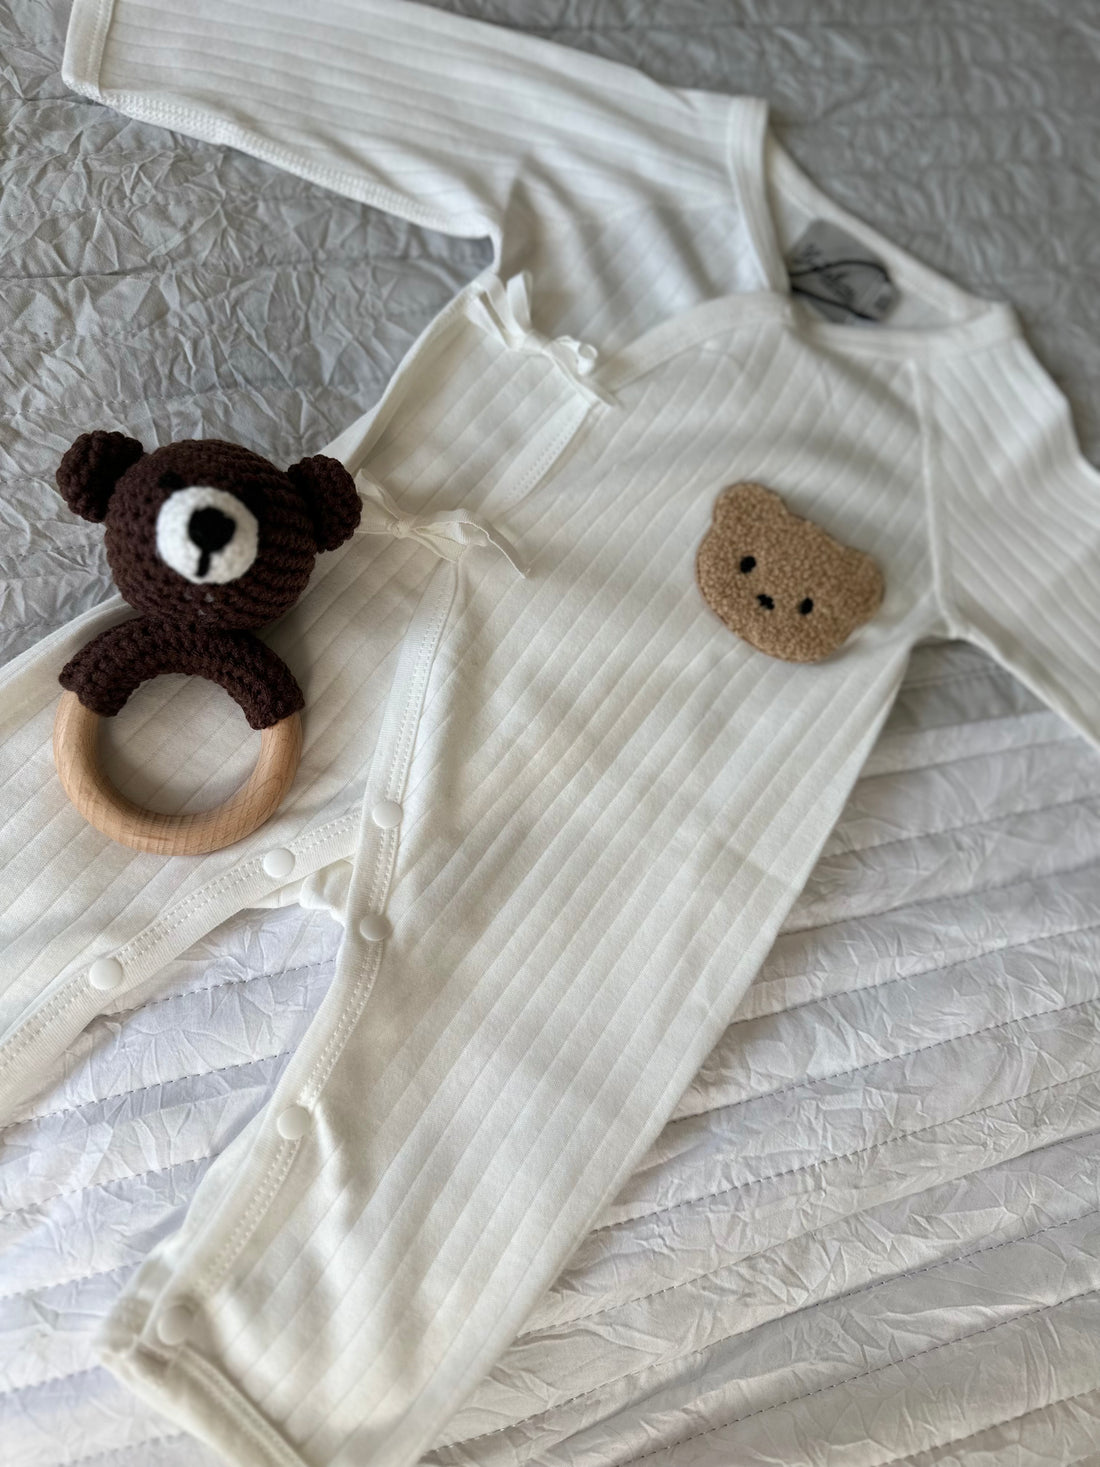 Unisex teddy outfit